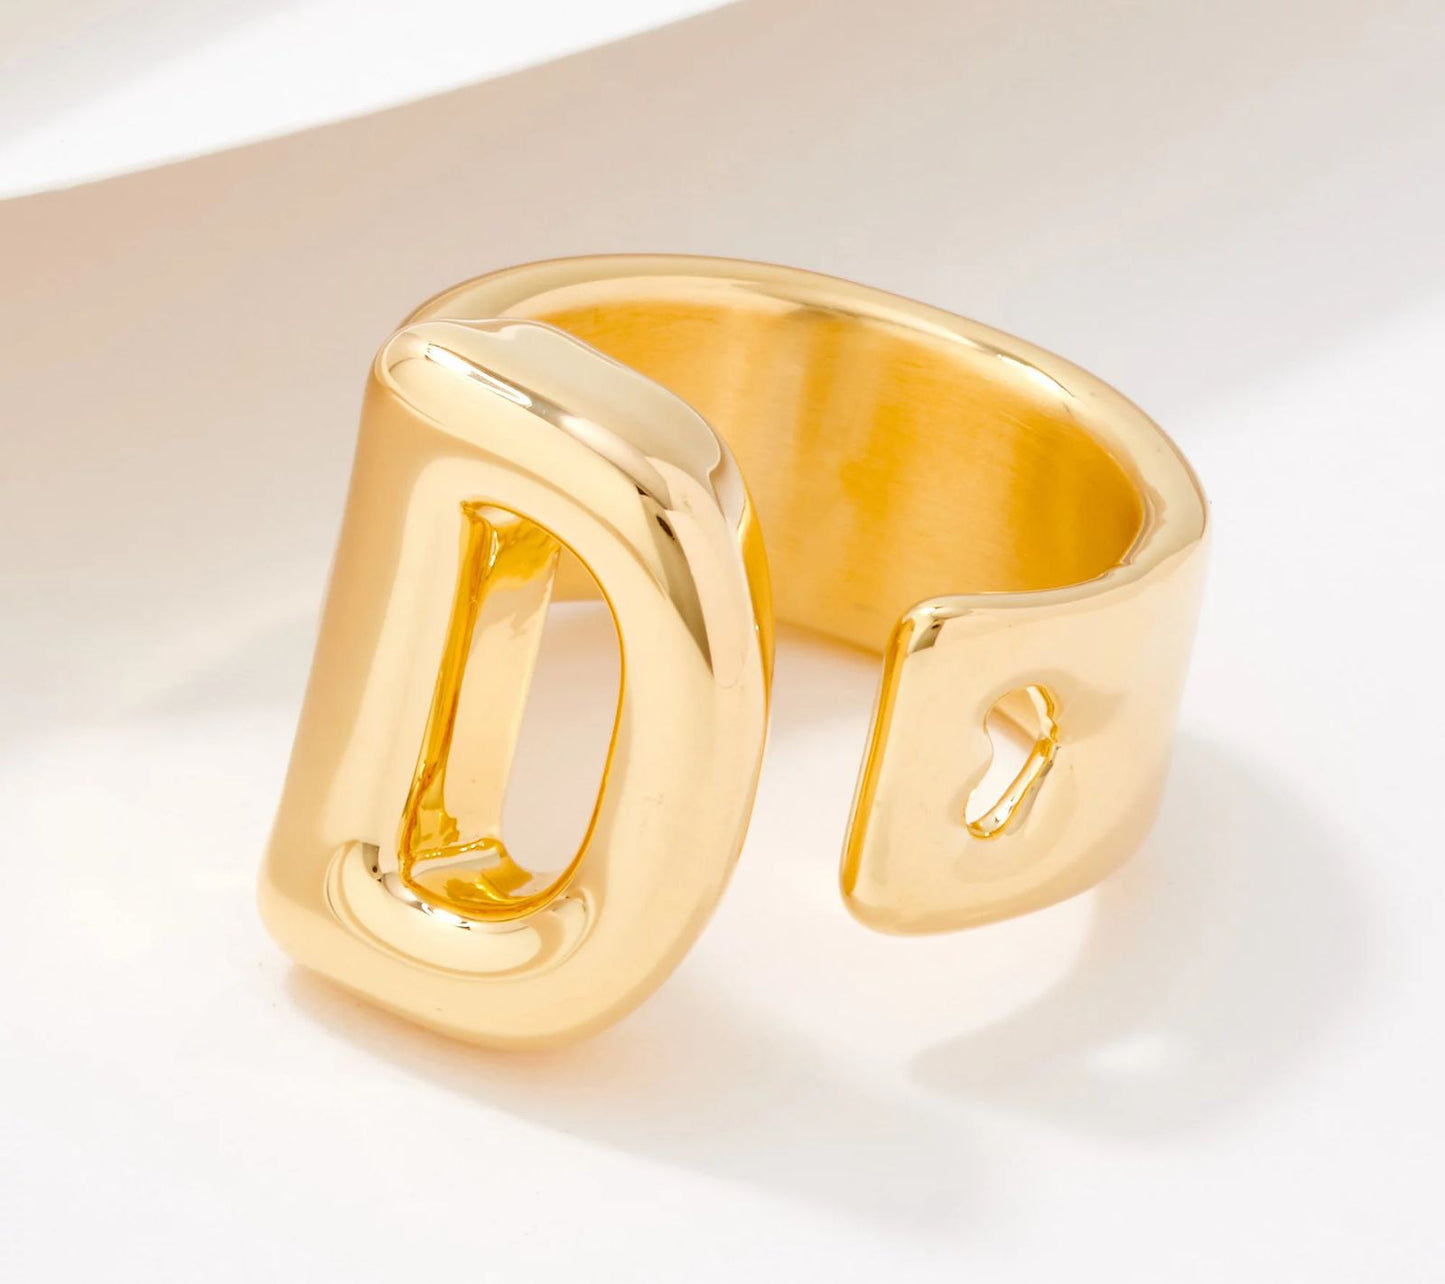 Oro Nuovo 14K Gold Over Resin Oversized Initial "D" Ring. Size.9